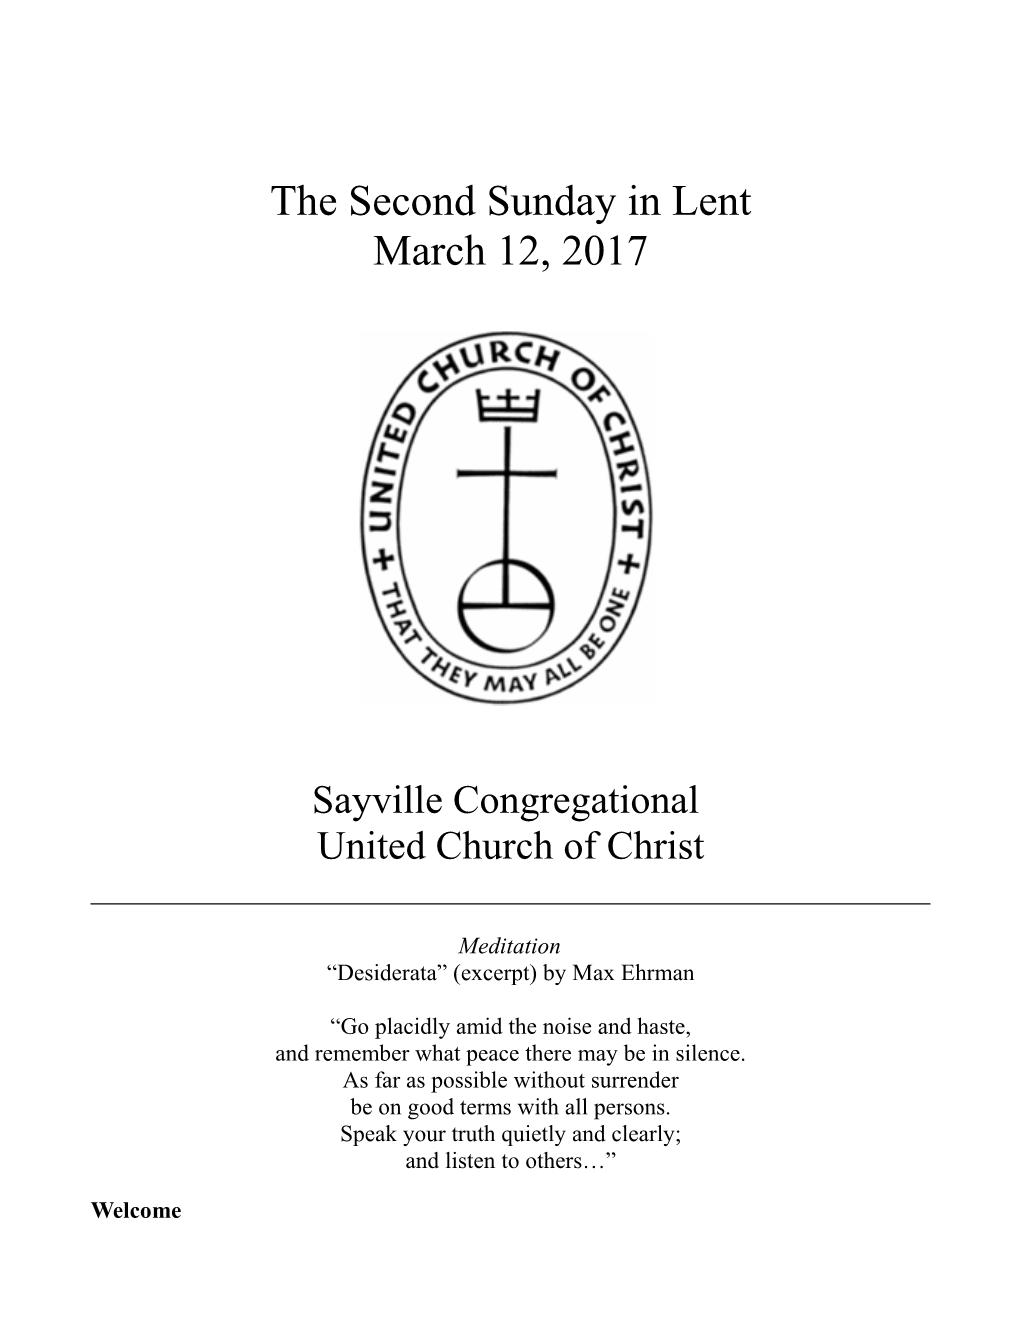 The Second Sunday in Lent